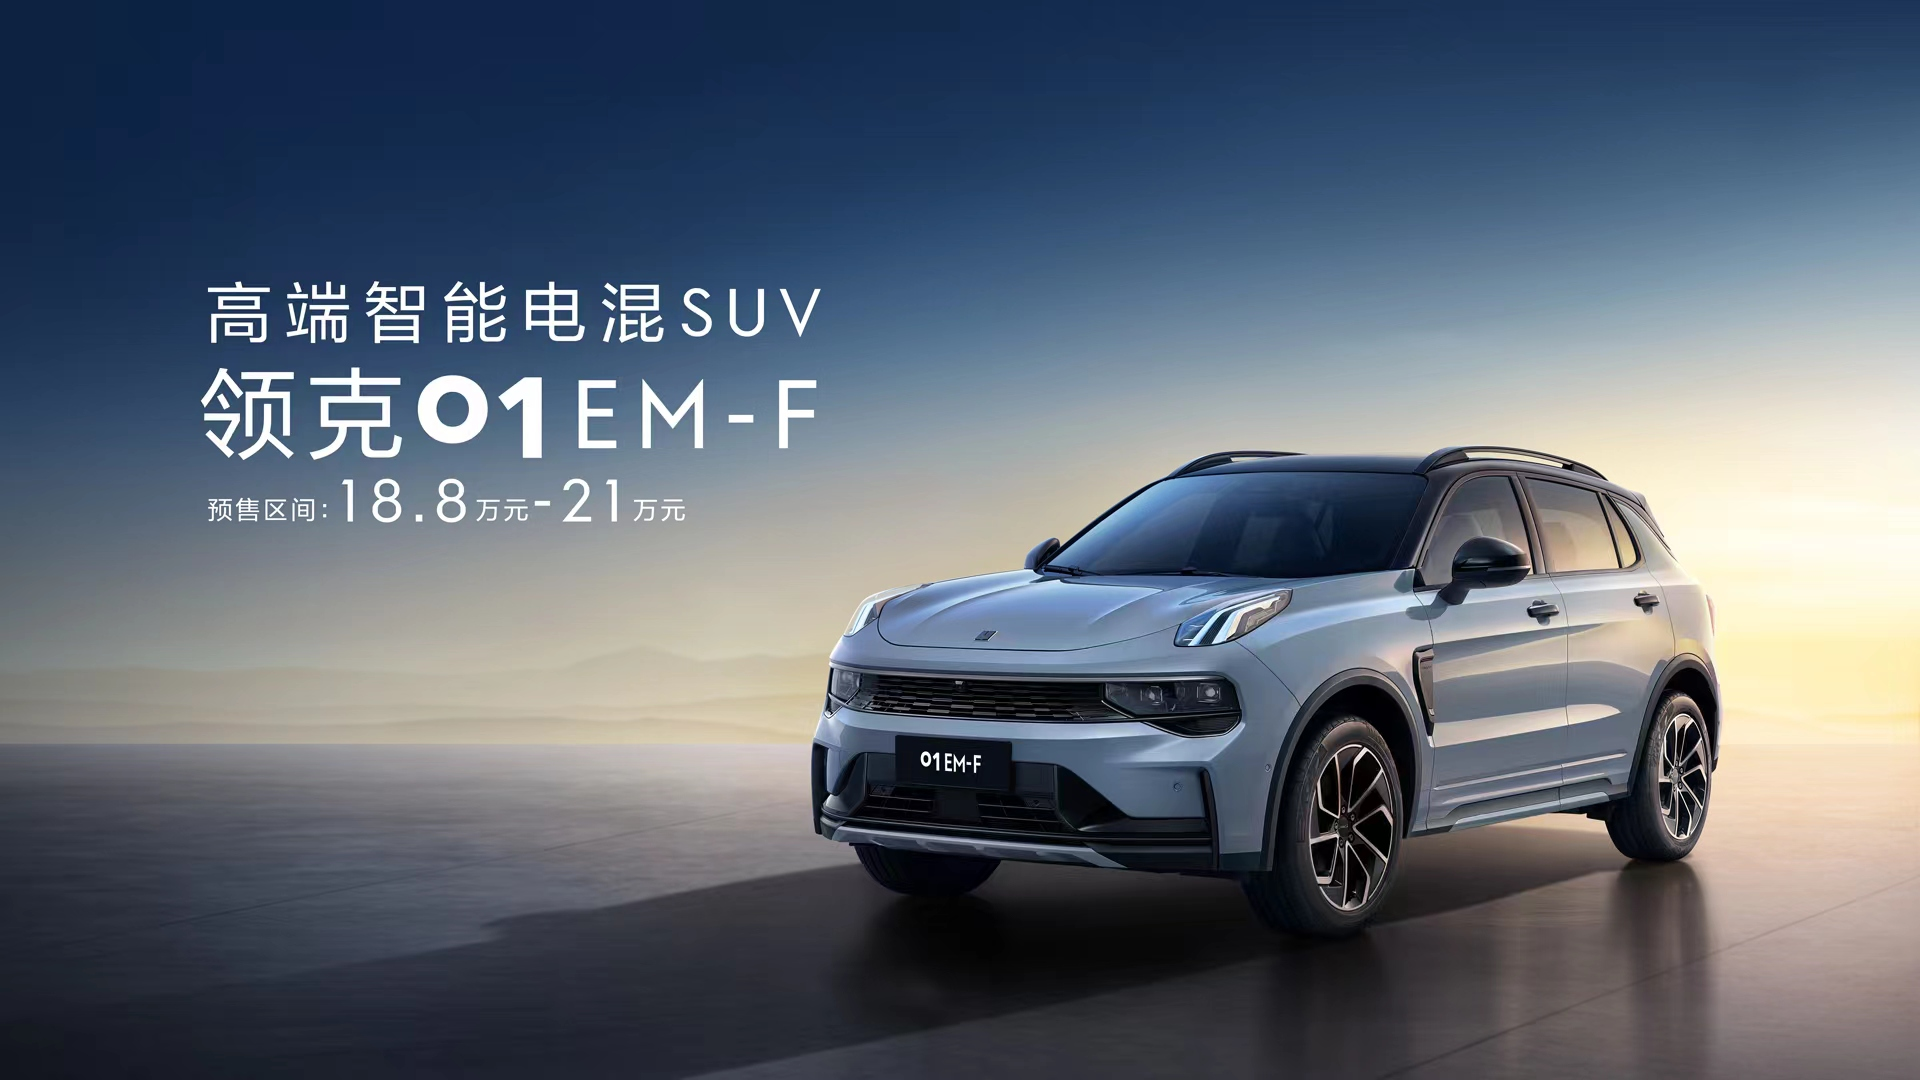 Official price of Lynk & Co 01 EM-F announced, with a fuel consumption of less than 5 liters per 100 kilometers.